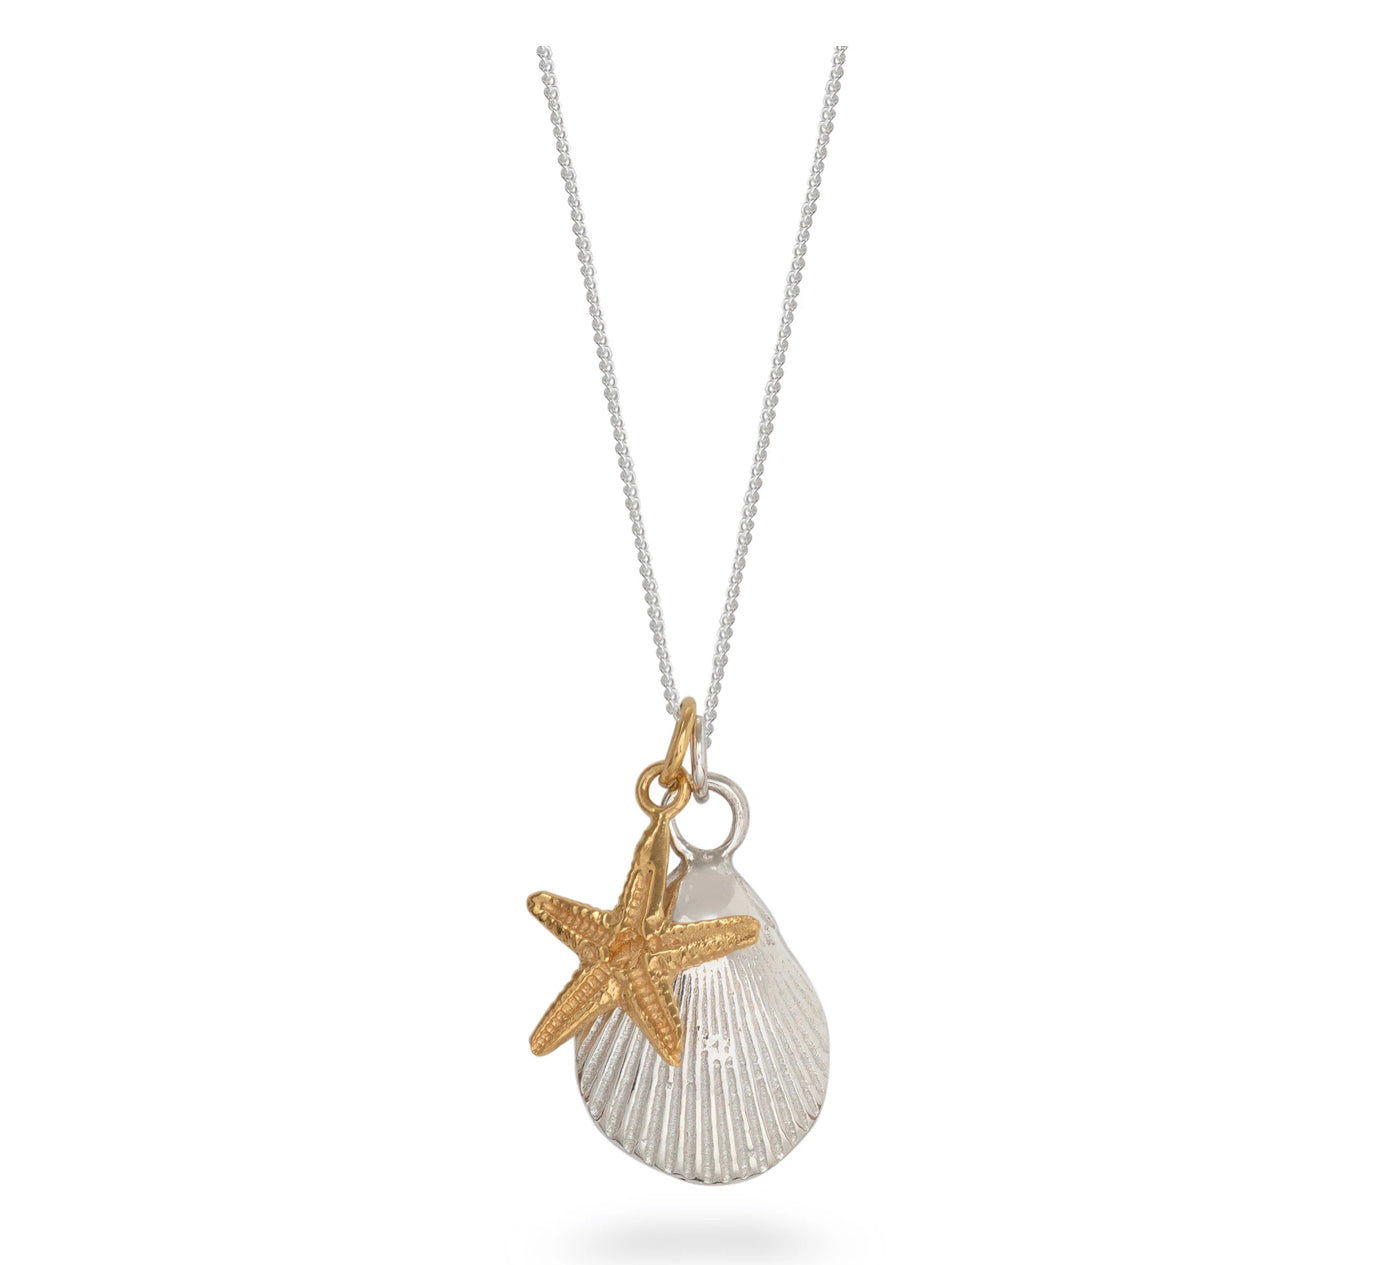 Shell and starfish necklace in silver and gold vermeil